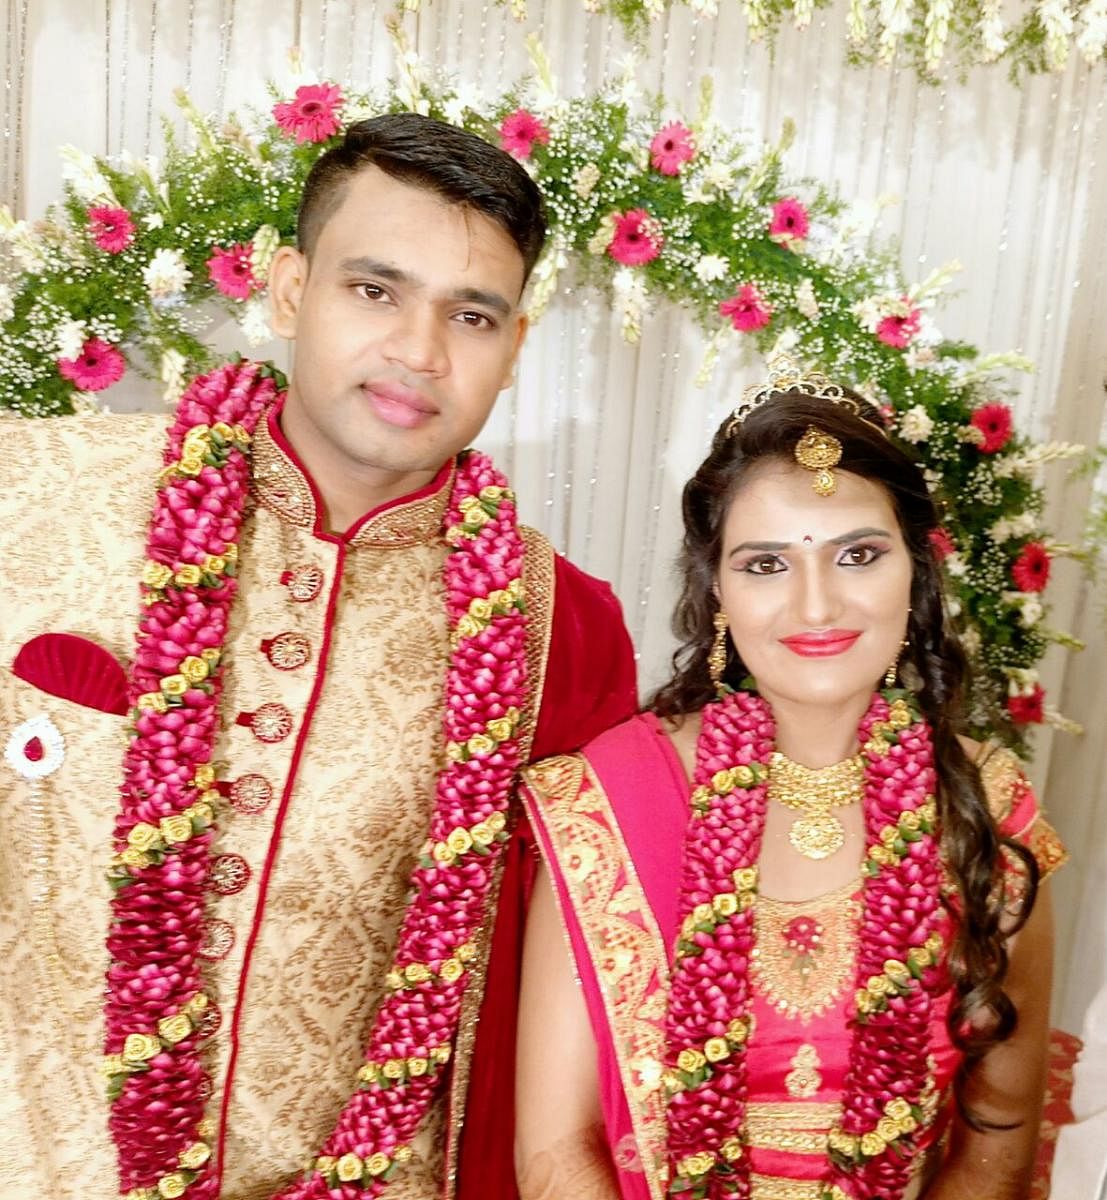 Sushmitha Raje with her husband Sharath Kumar at their wedding in July 2018. SPECIAL ARRANGEMENT